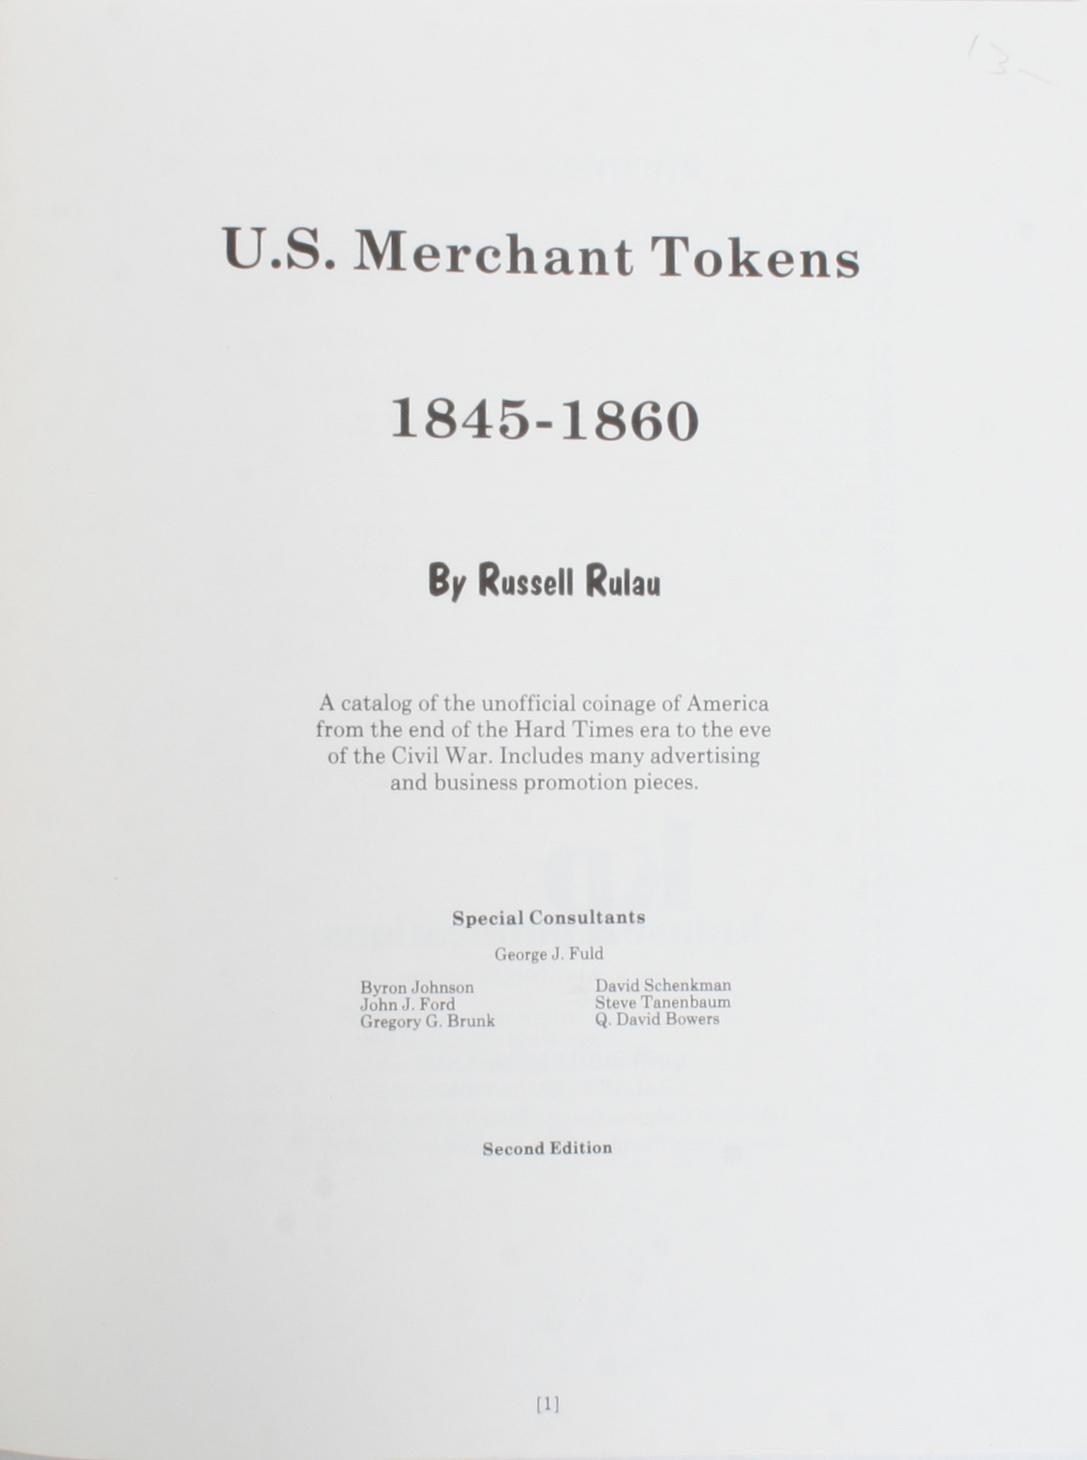 Two books on trade tokens. 1.) U.S. Merchant Tokens 1845-1860 by Russell Rulau. Iola: Krause Publications, Inc., 1985. Softcover. 192 pp. A catalogue of the unofficial coinage of America from the end of the depression era to the eve of the Civil